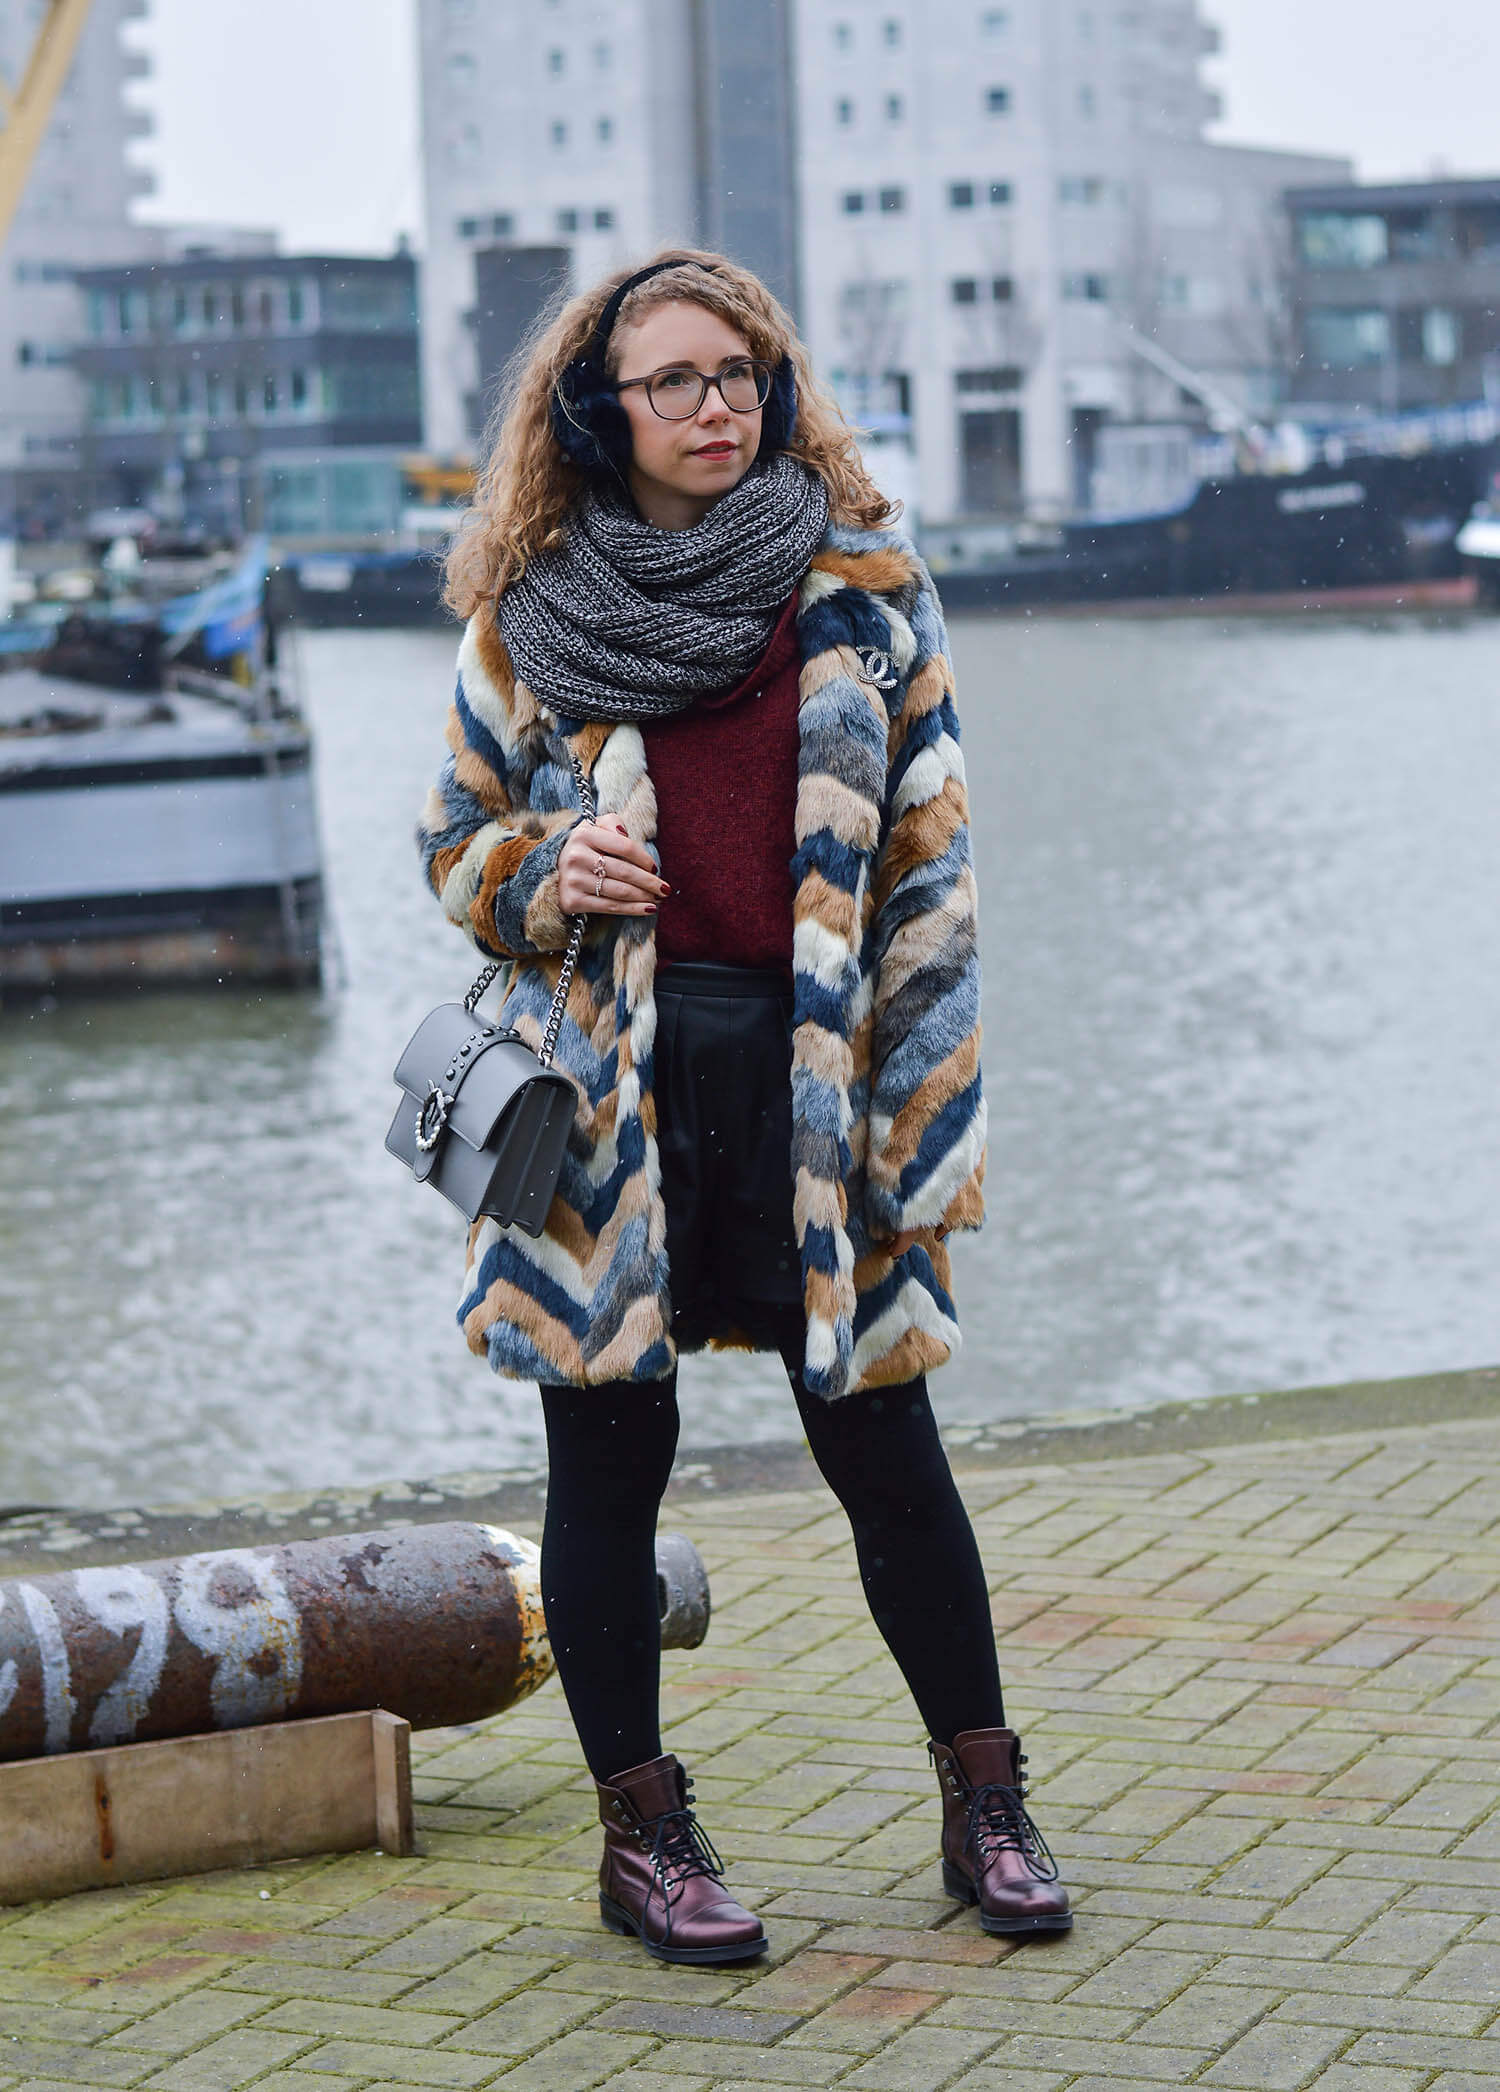 Kationette-Outfit-Fake-Fur-Coat-Pinko-Bag-and-Metallic-Boots-Rotterdam-fashionblogger-streetstyle